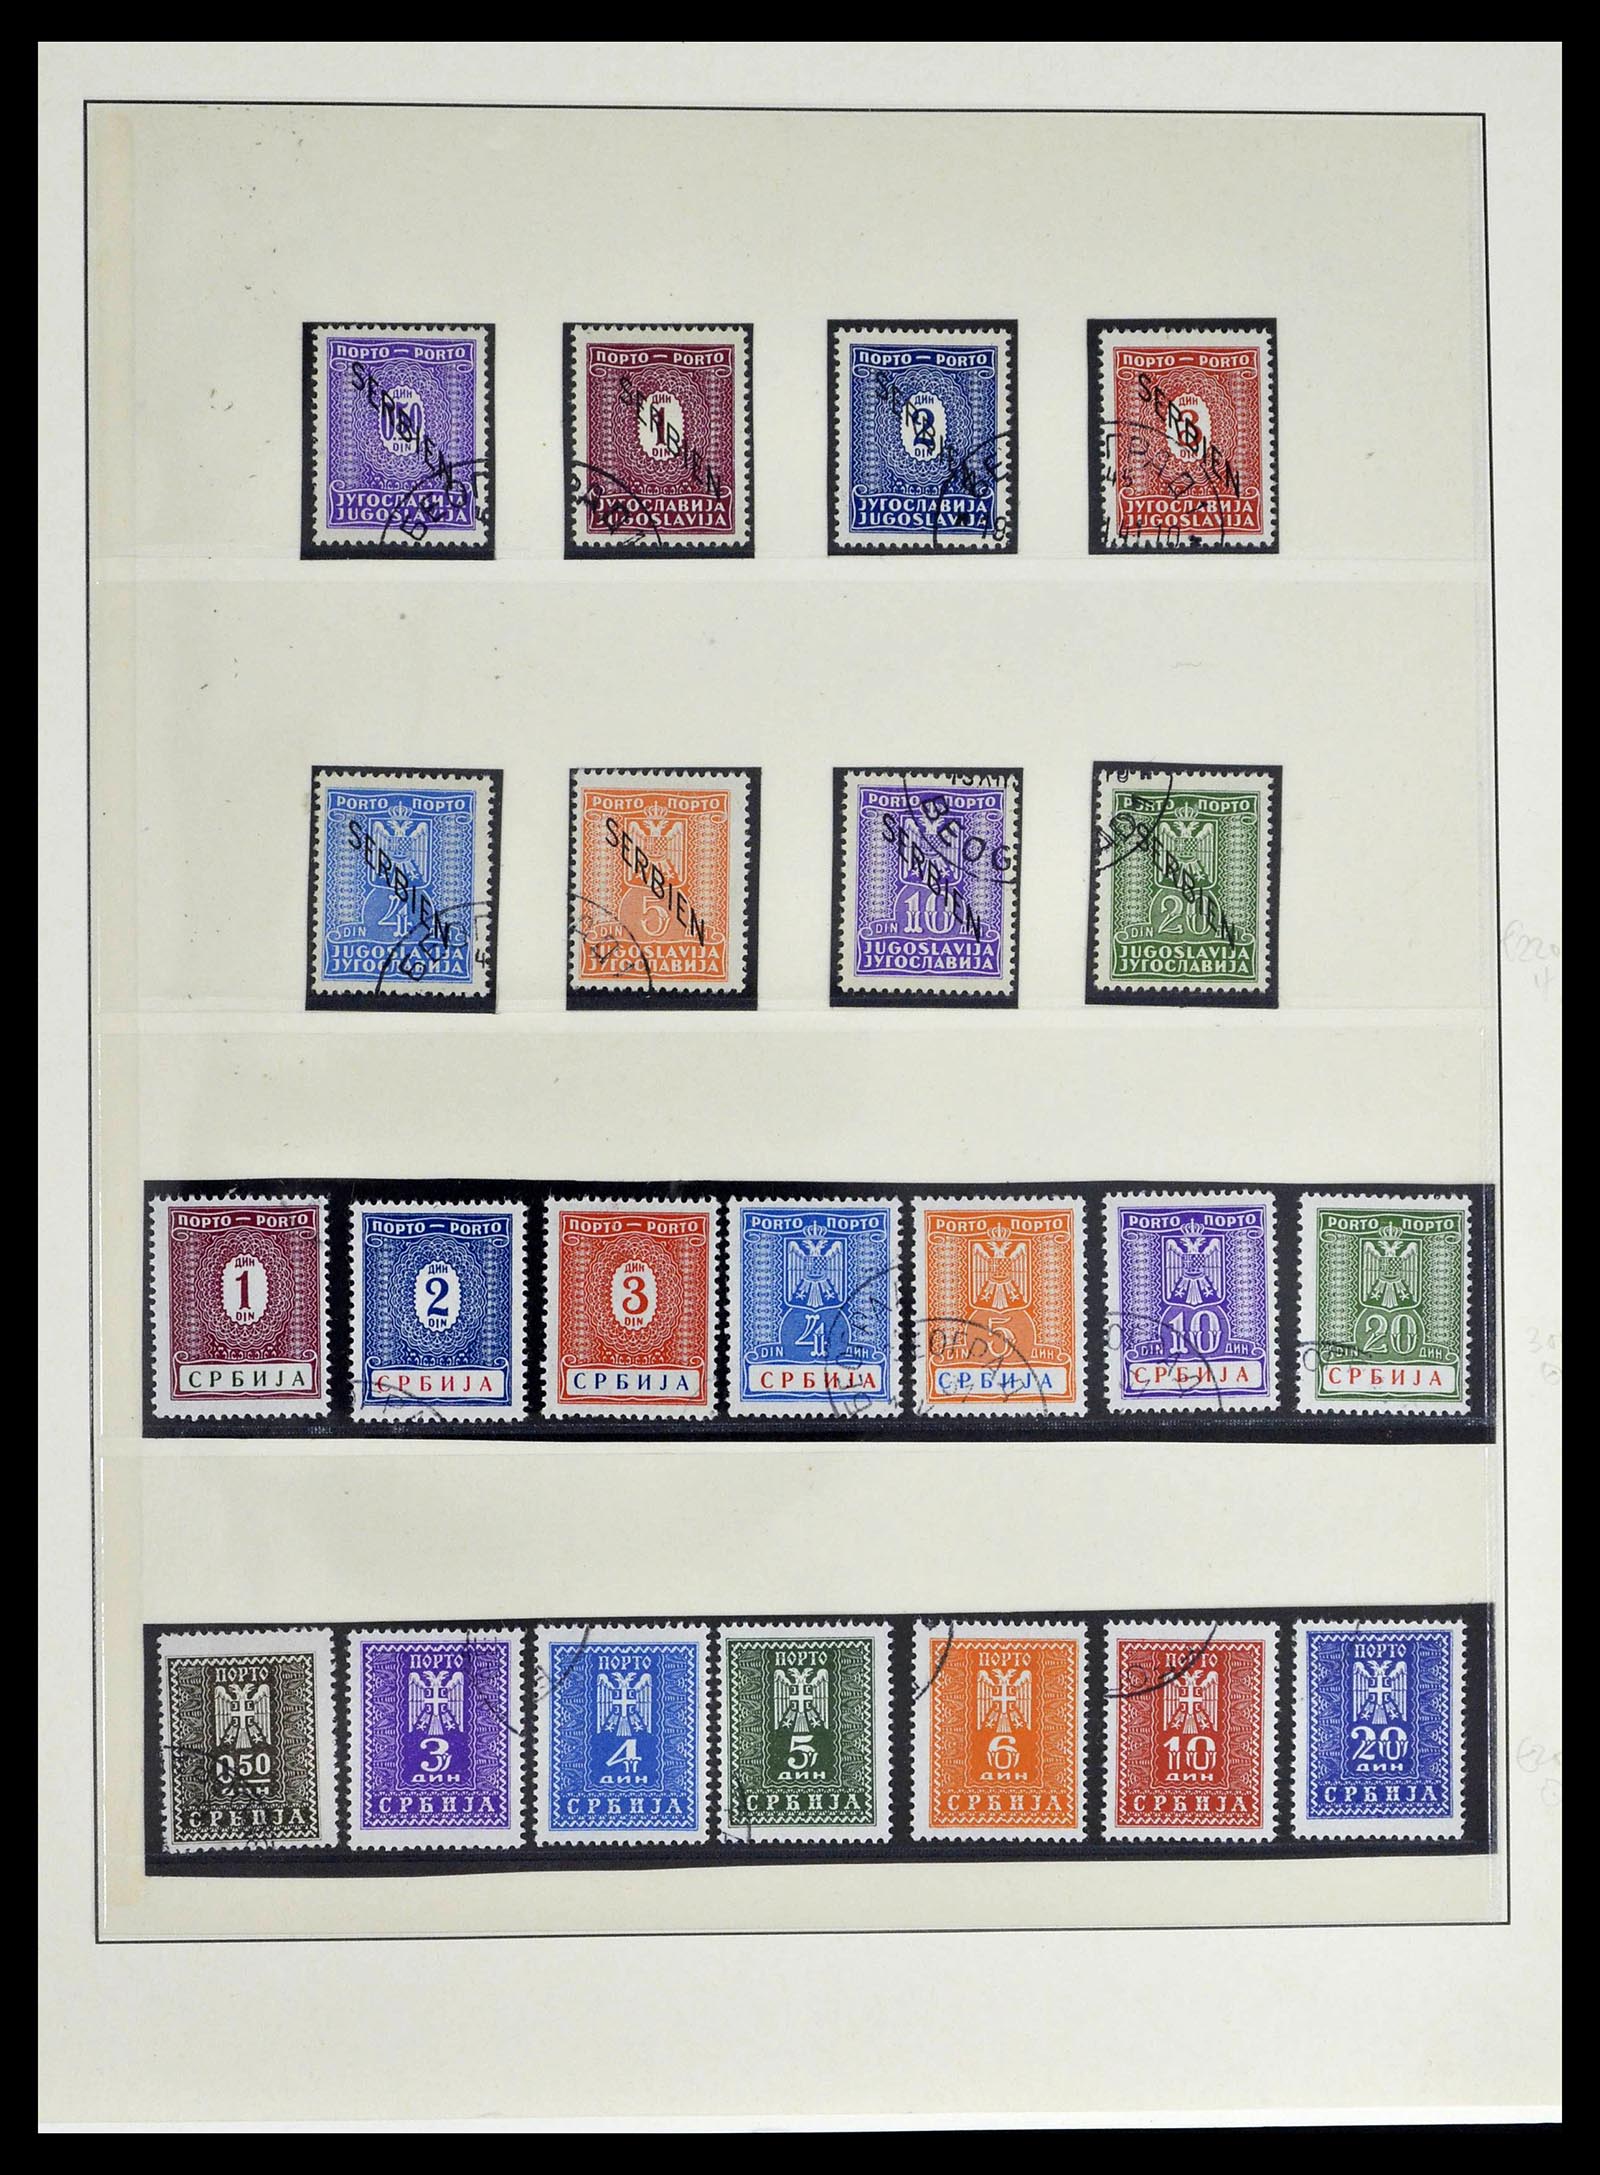 39396 0028 - Stamp collection 39396 German occupation WW II 1939-1945.